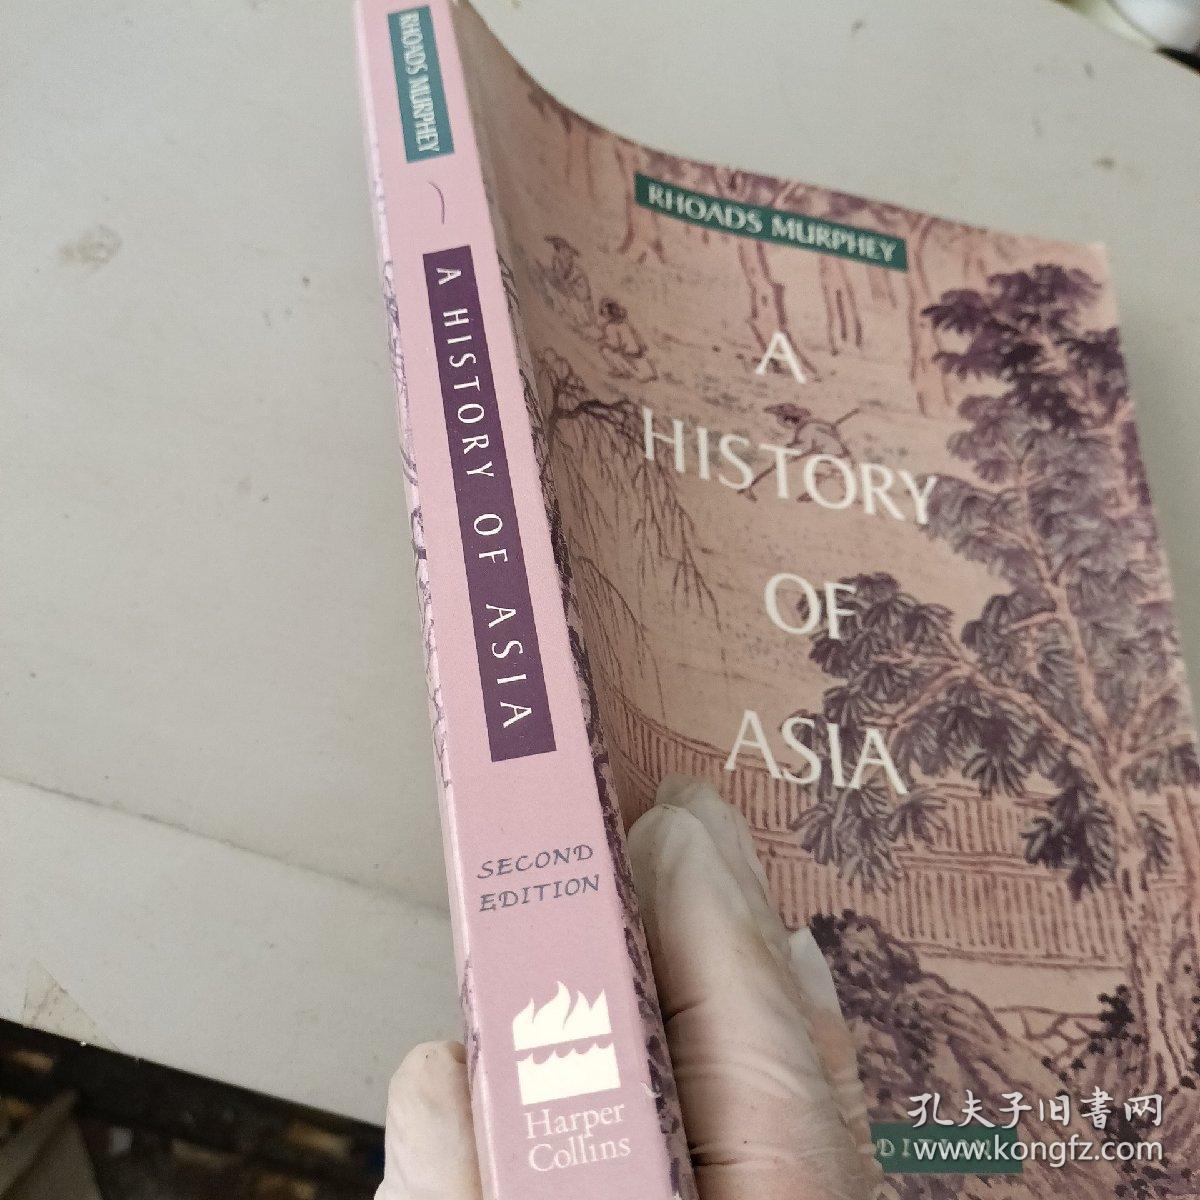 A HISORY OF ASIA